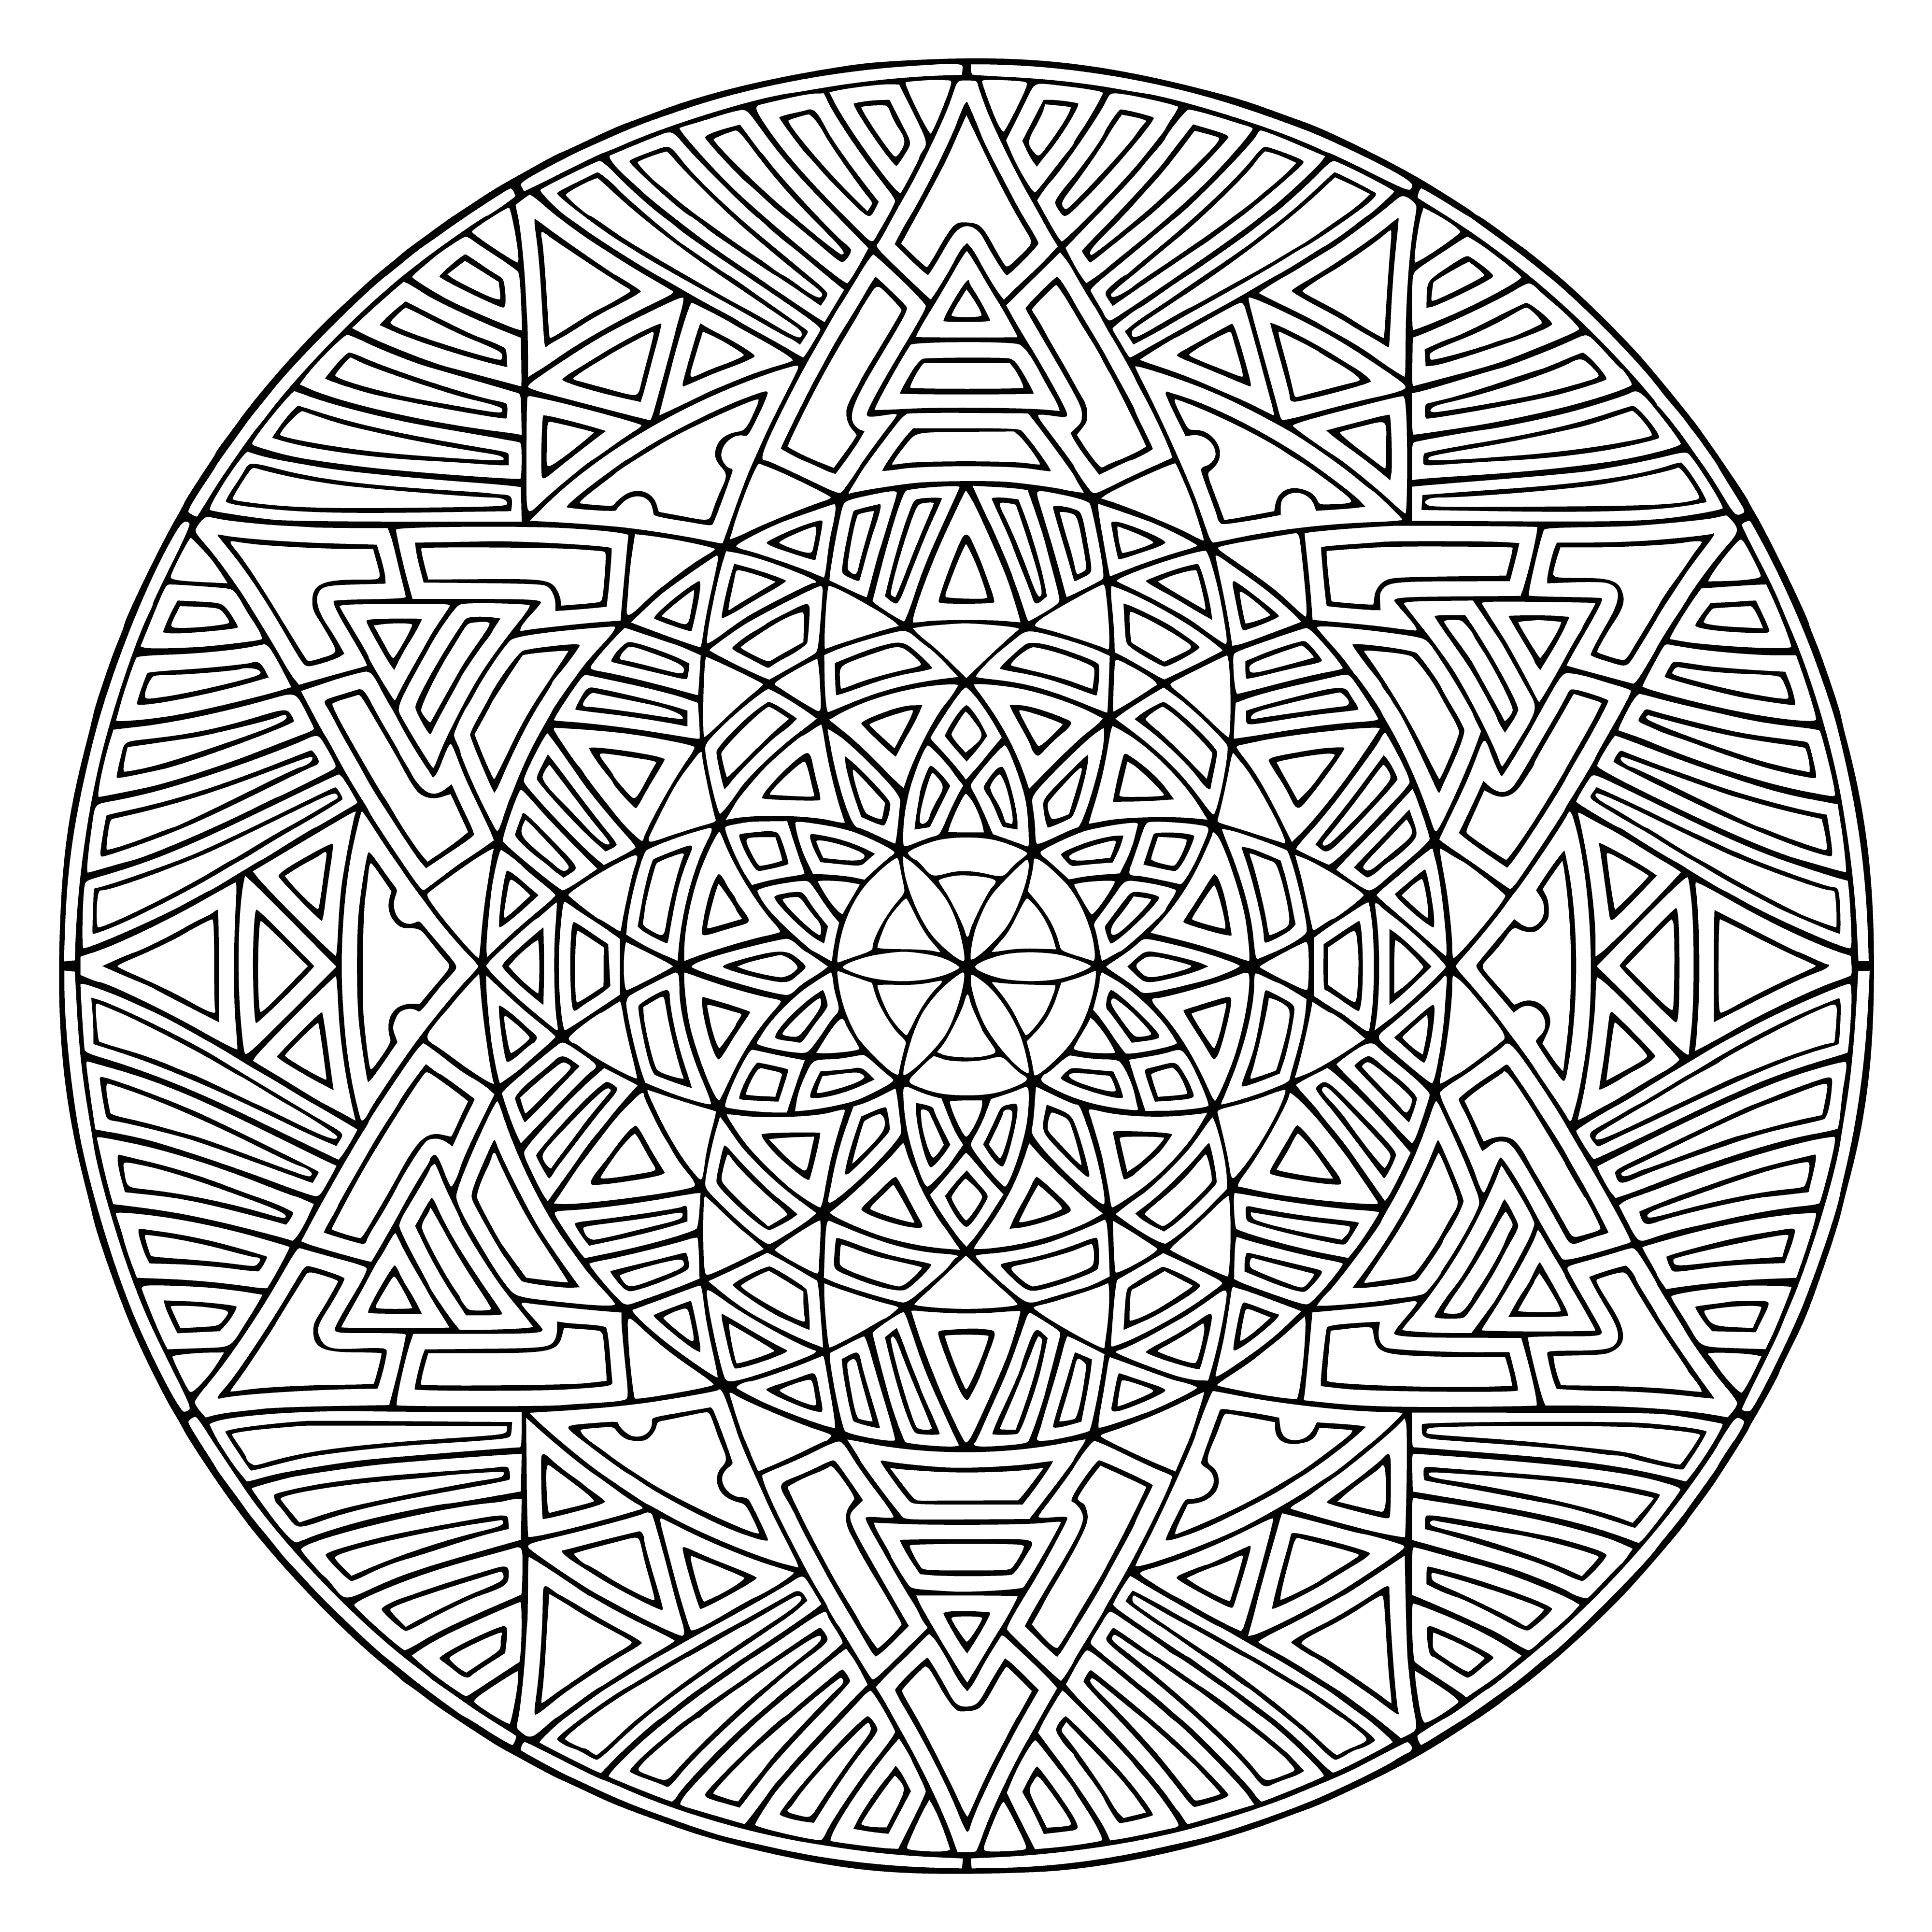 coloring page: Coloring a mandala helps you meditate, explore yourself, and take a spiritual journey.